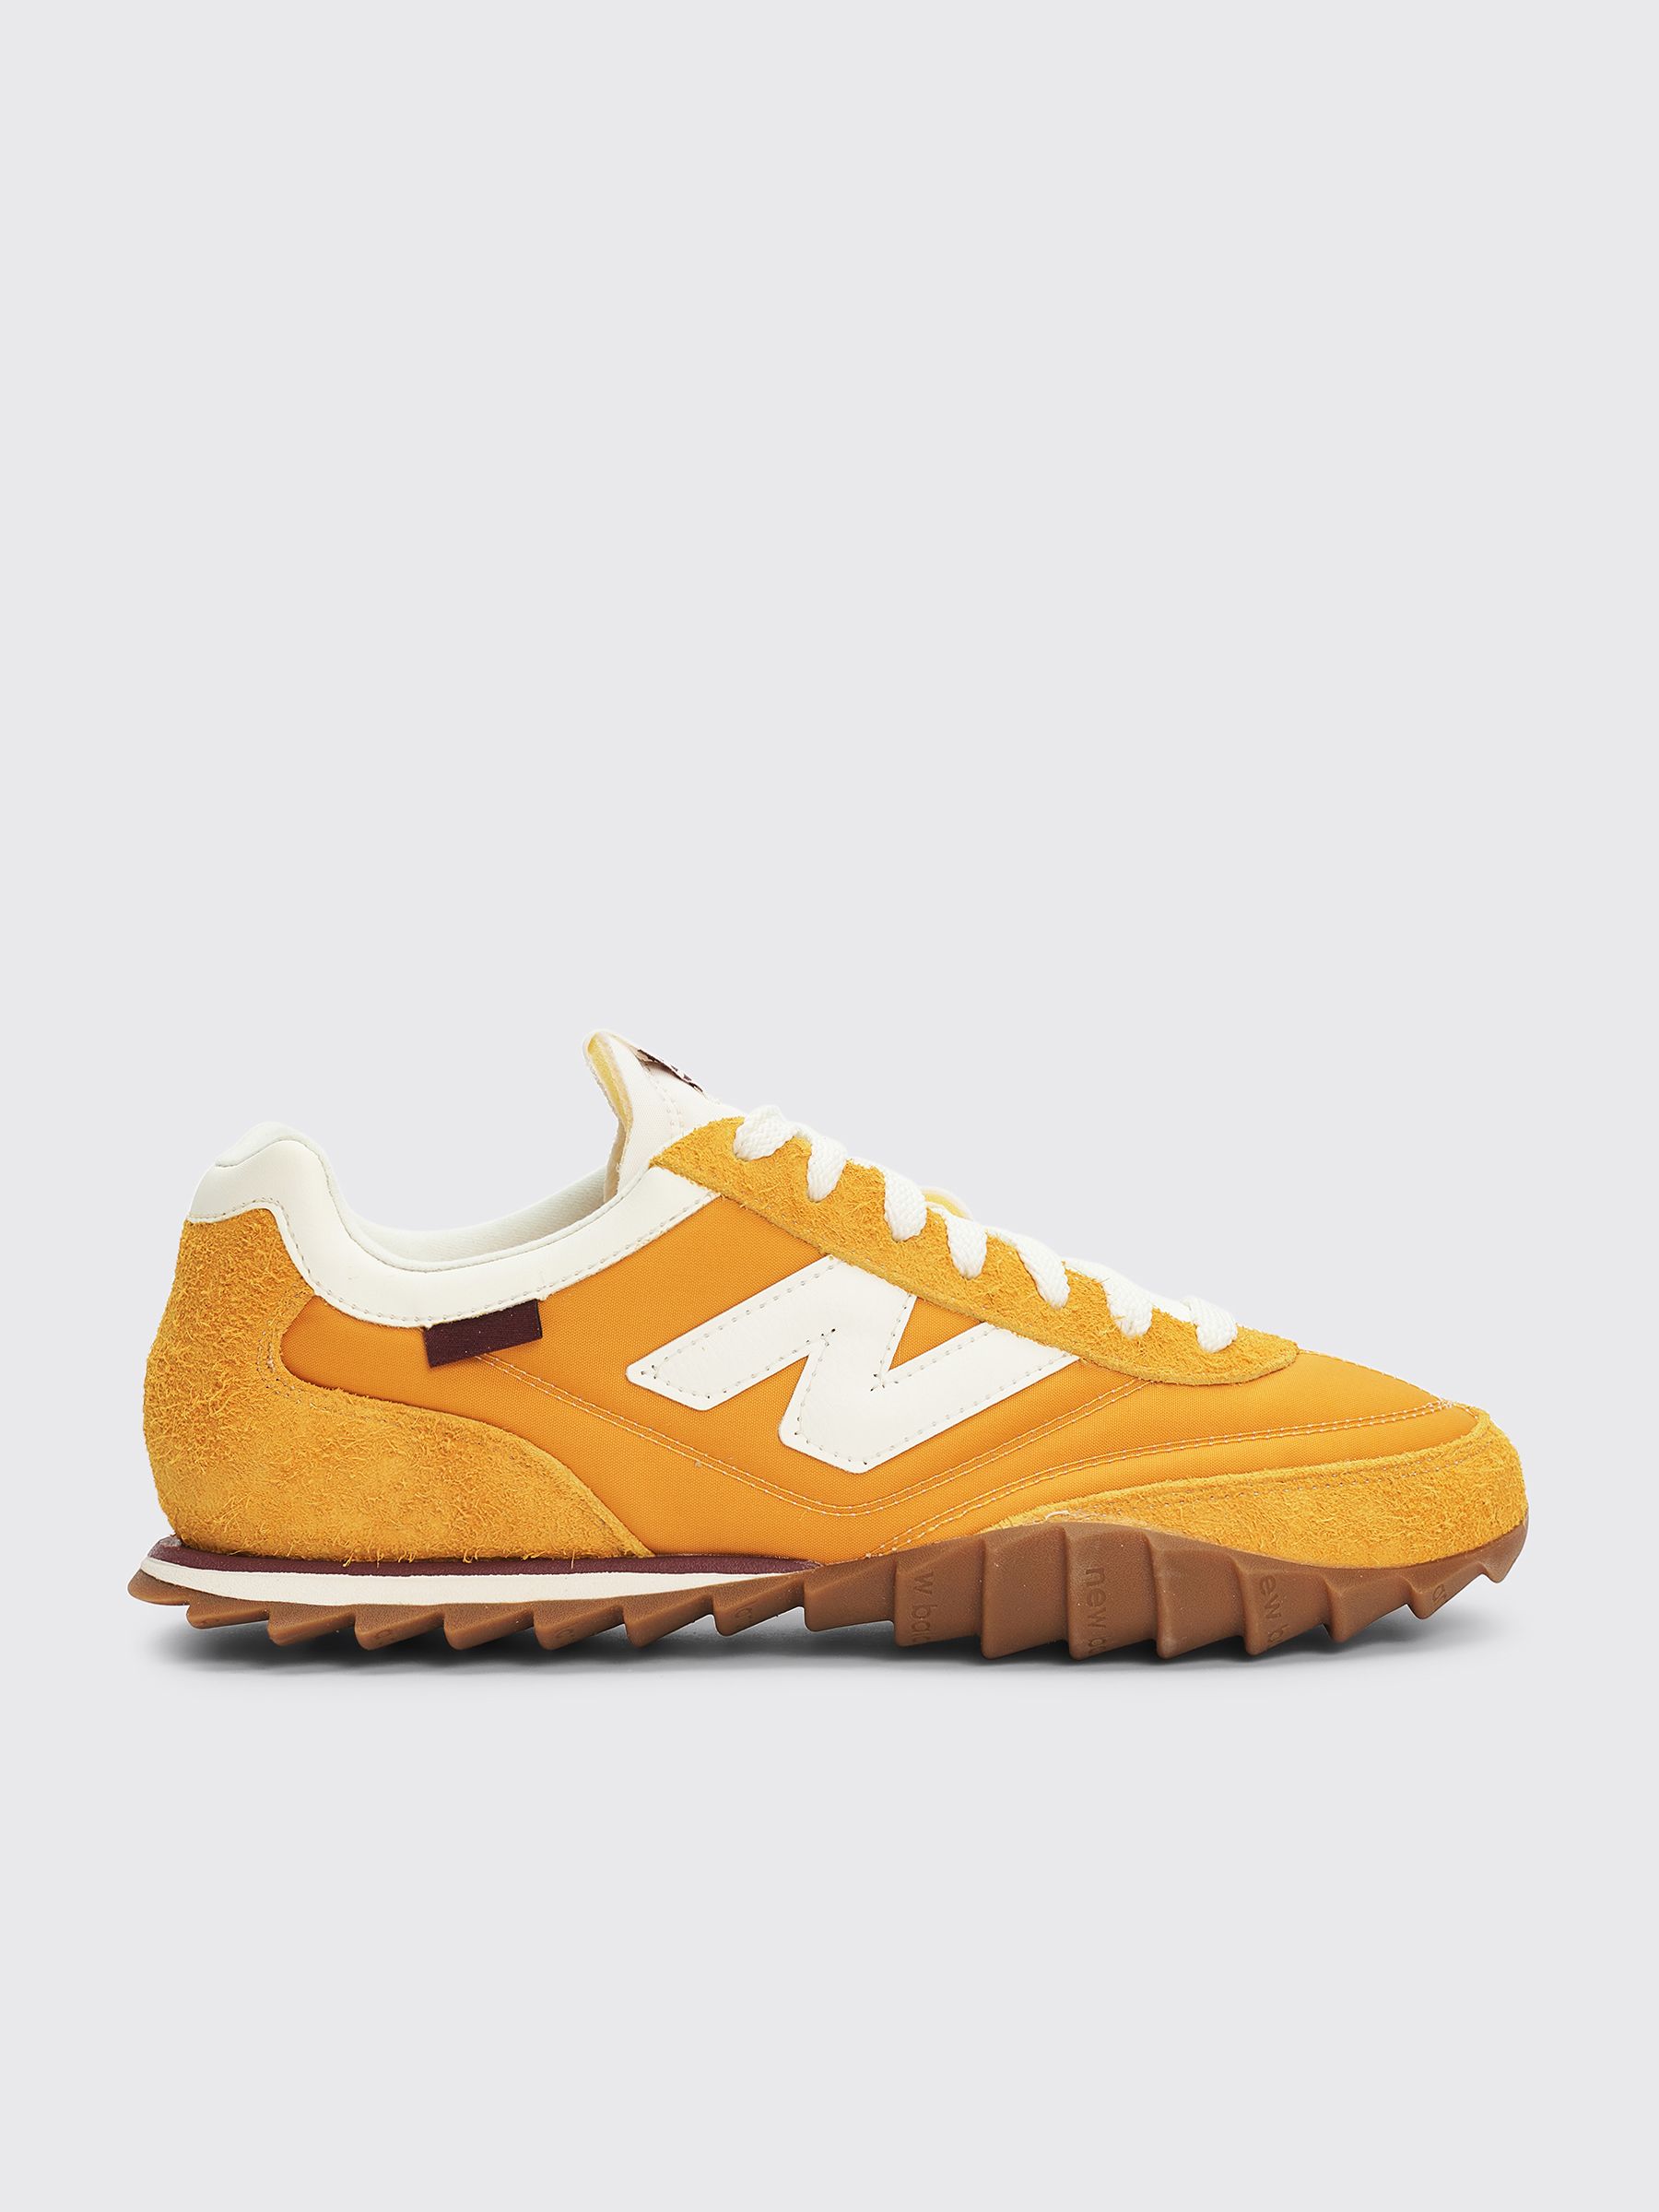 undefined | New Balance x Donald Glover RC30 Golden Hour